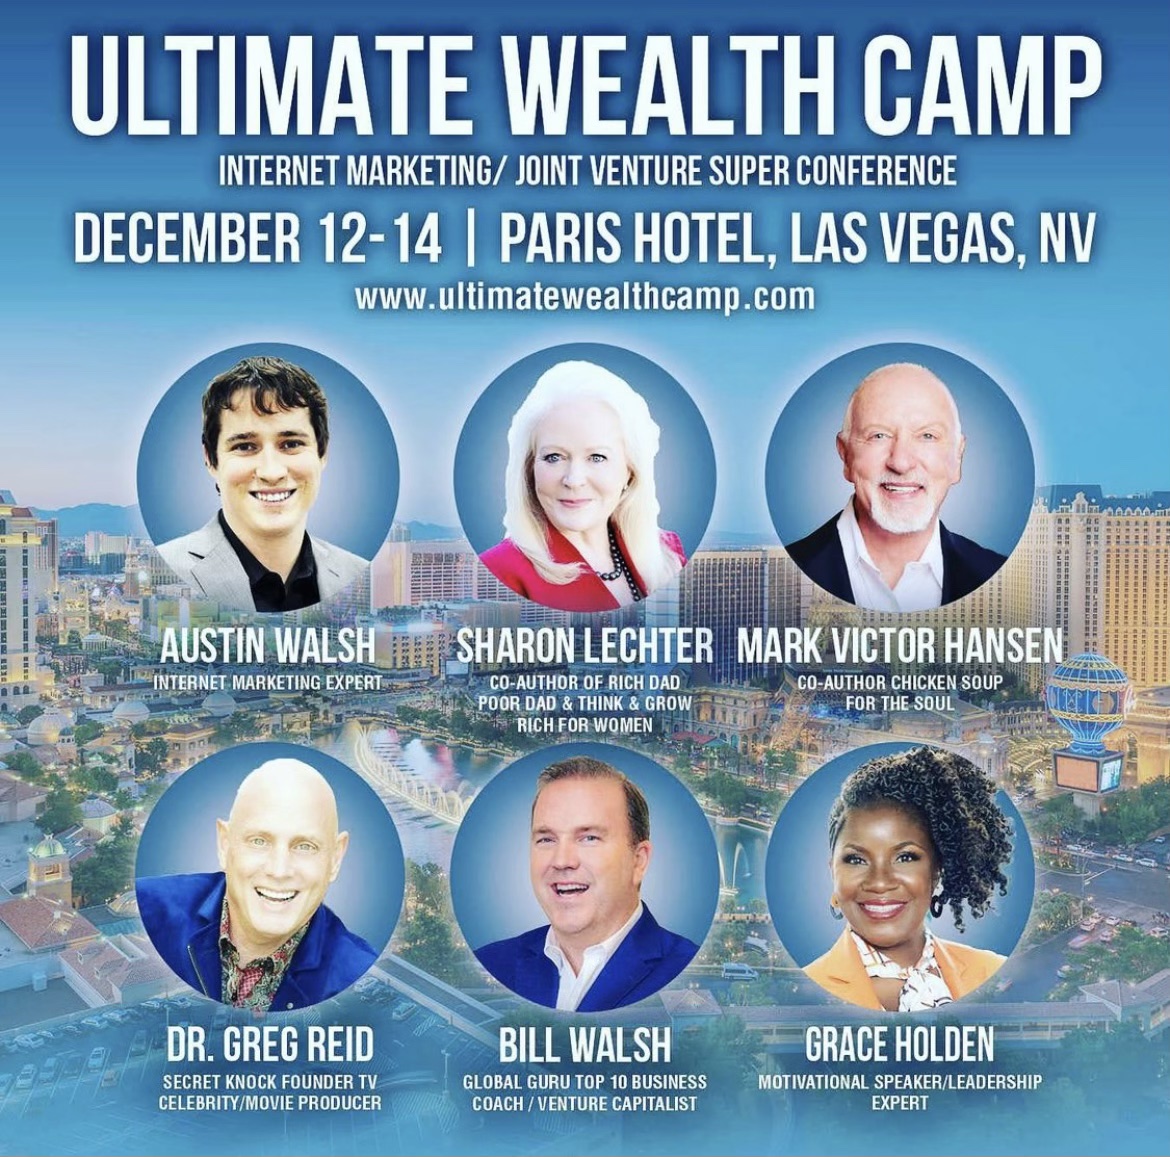 Sharon Lechter on X: Please join me for the Ultimate Wealth Camp